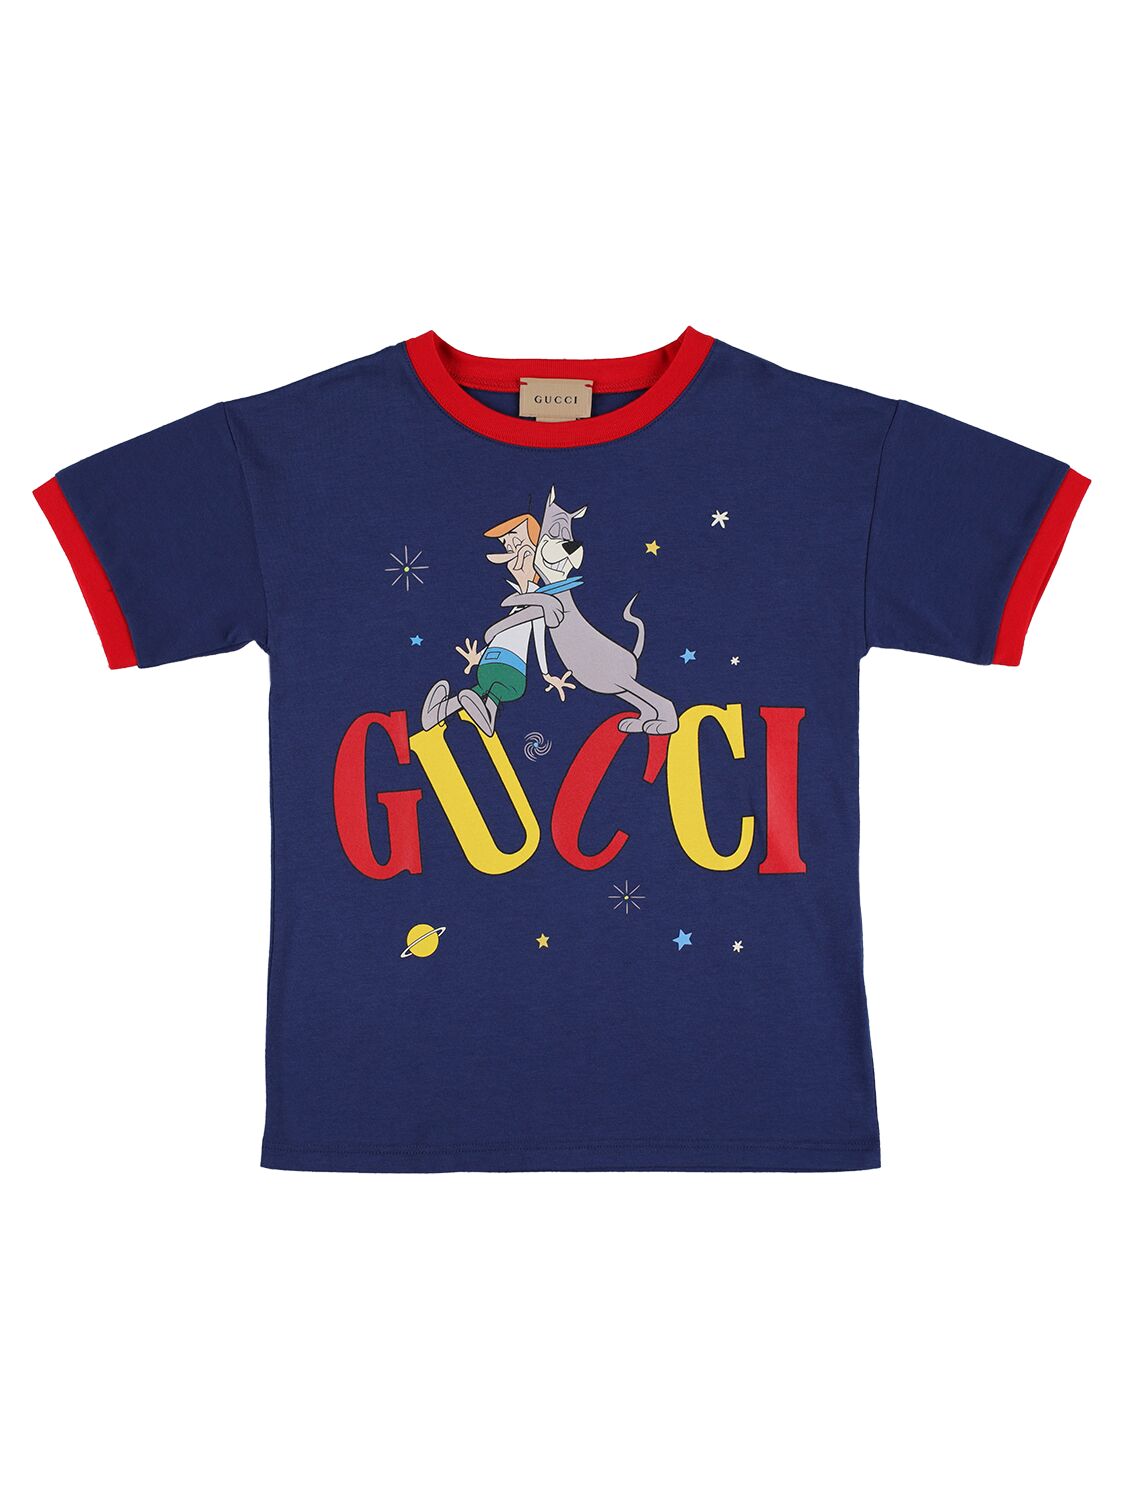 Gucci And The Jetsons Cotton T-shirt